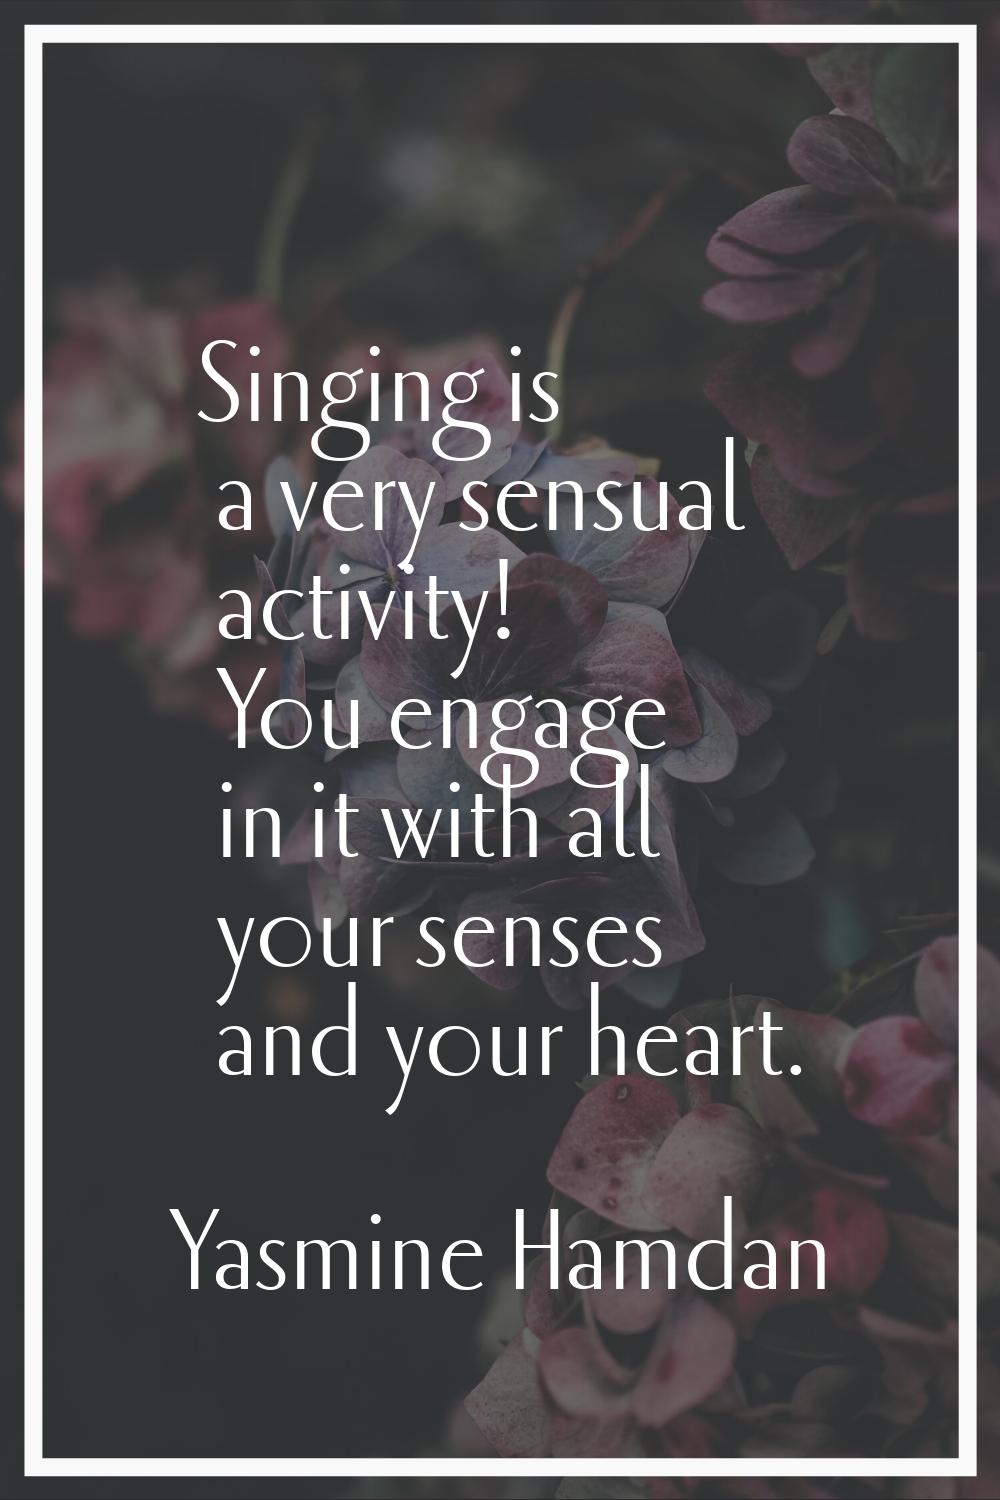 Singing is a very sensual activity! You engage in it with all your senses and your heart.